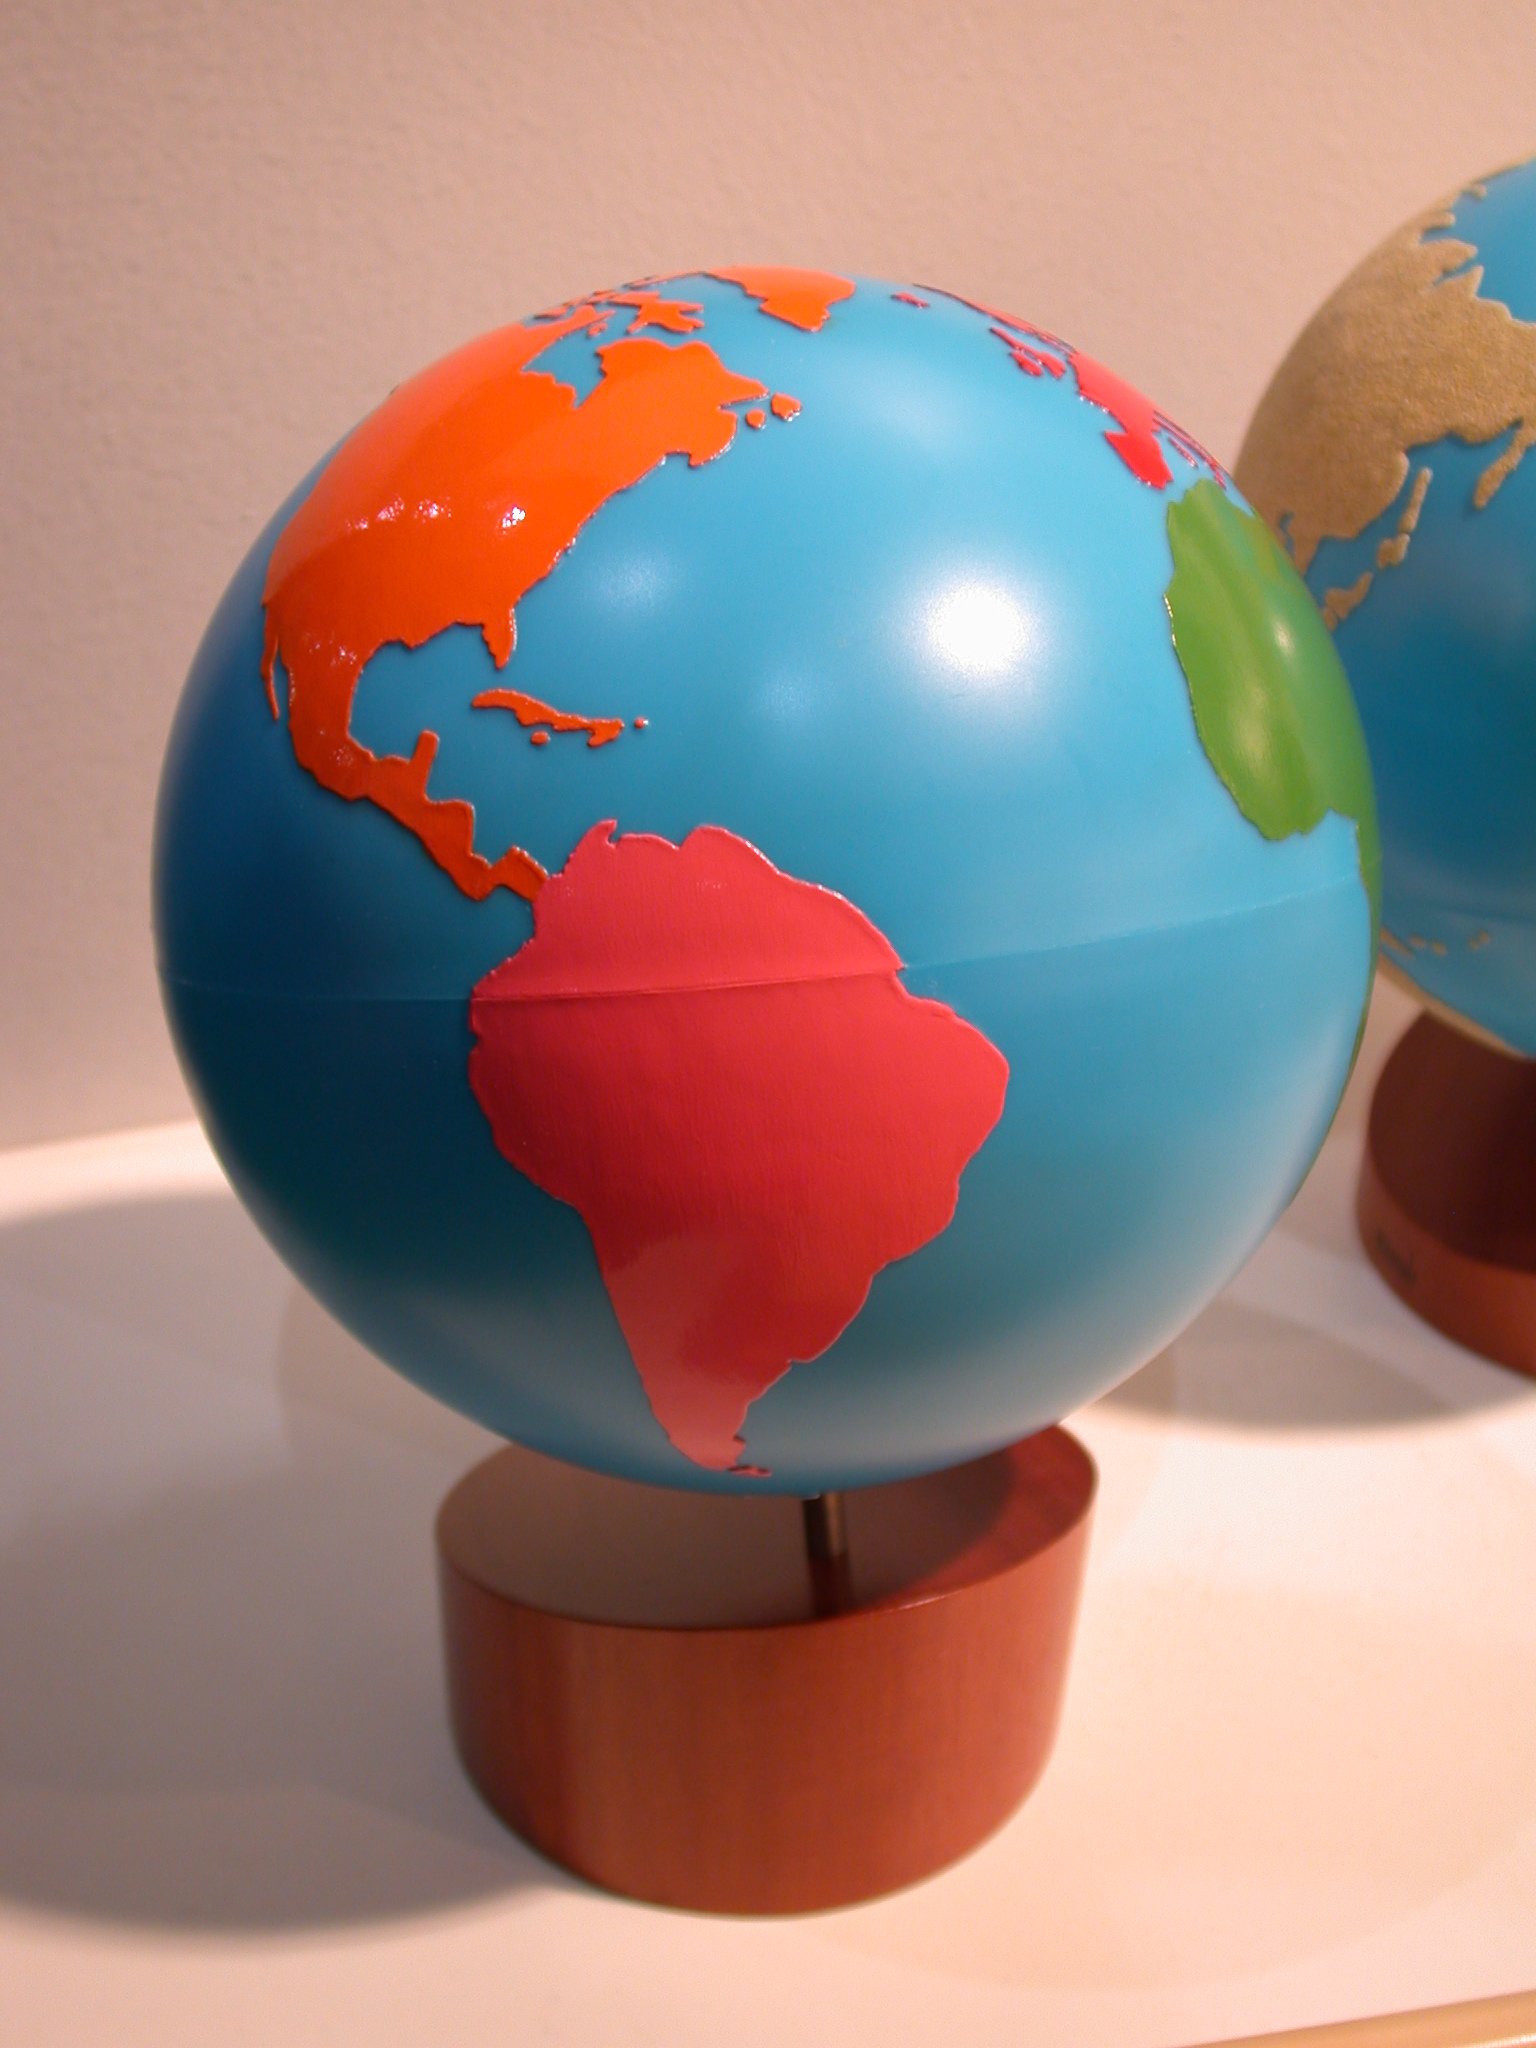 global sout-america south america usa atlantic ocean cuba toy small round